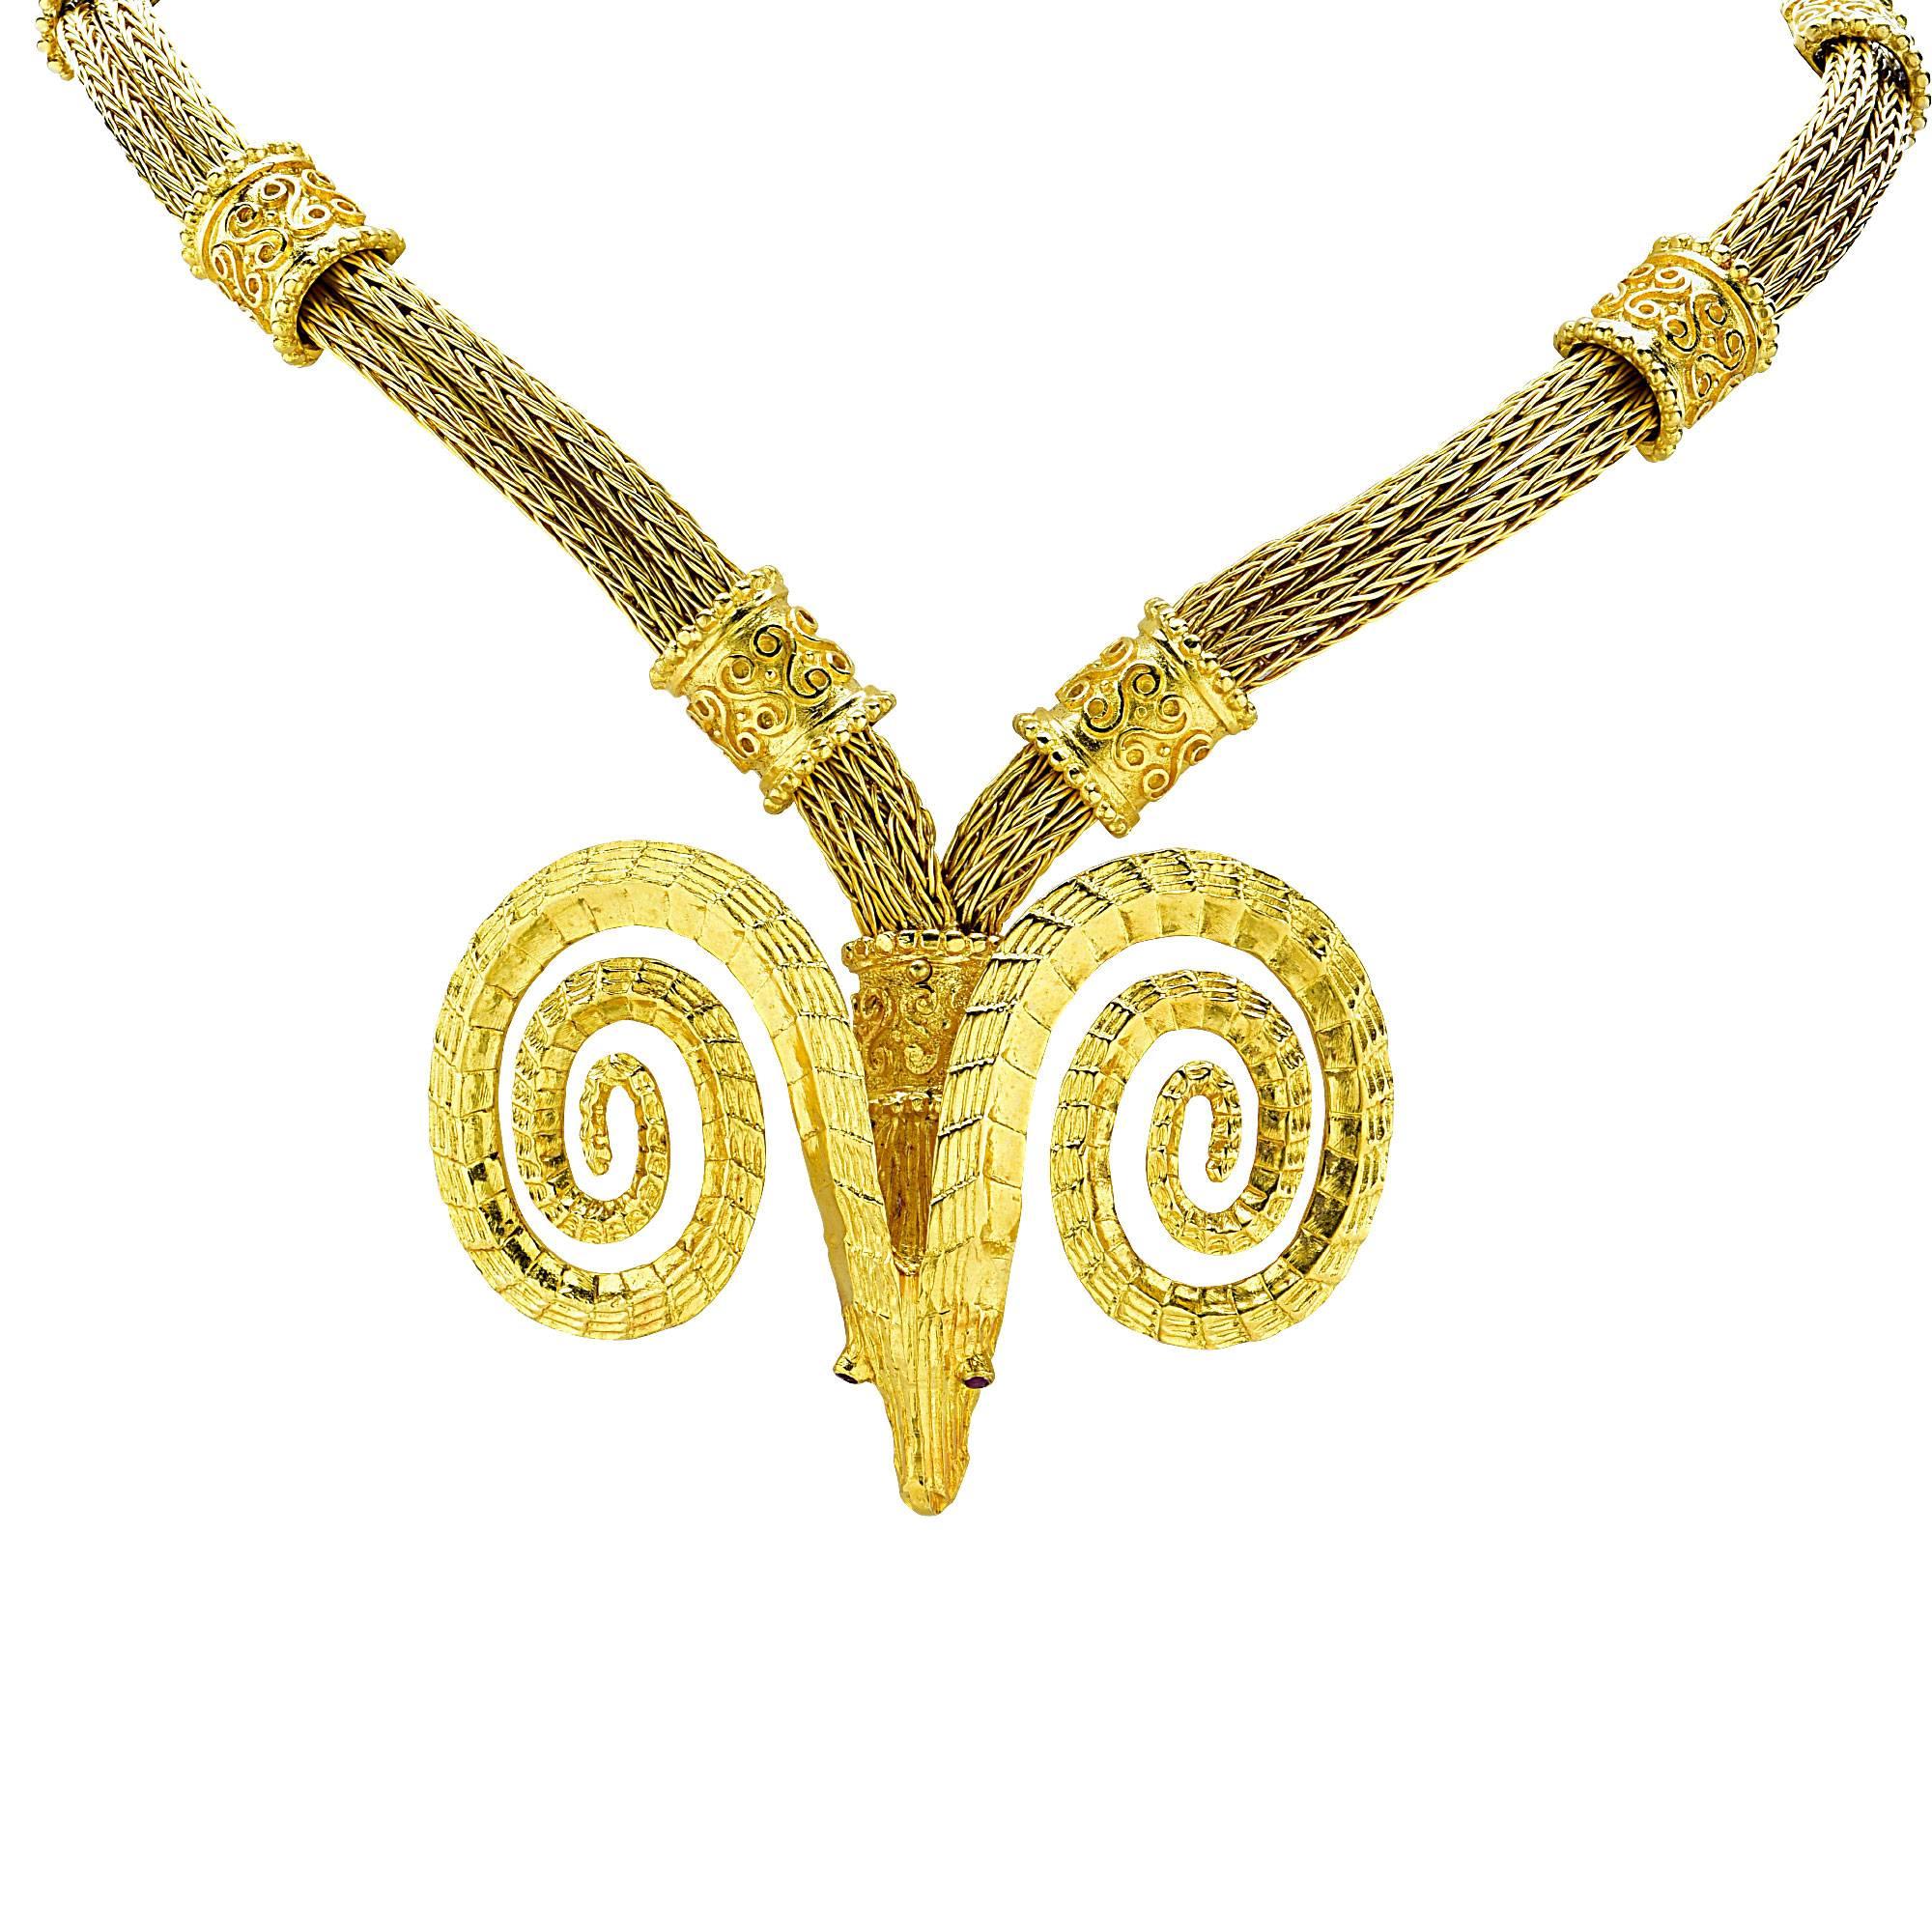 18K yellow gold necklace, bracelet and earring set. Woven gold chain accented by a ram's head motif. Made in Greece.

Metal weight: 184.96 grams

This gold set is accompanied by a retail appraisal performed by a GIA Graduate Gemologist.